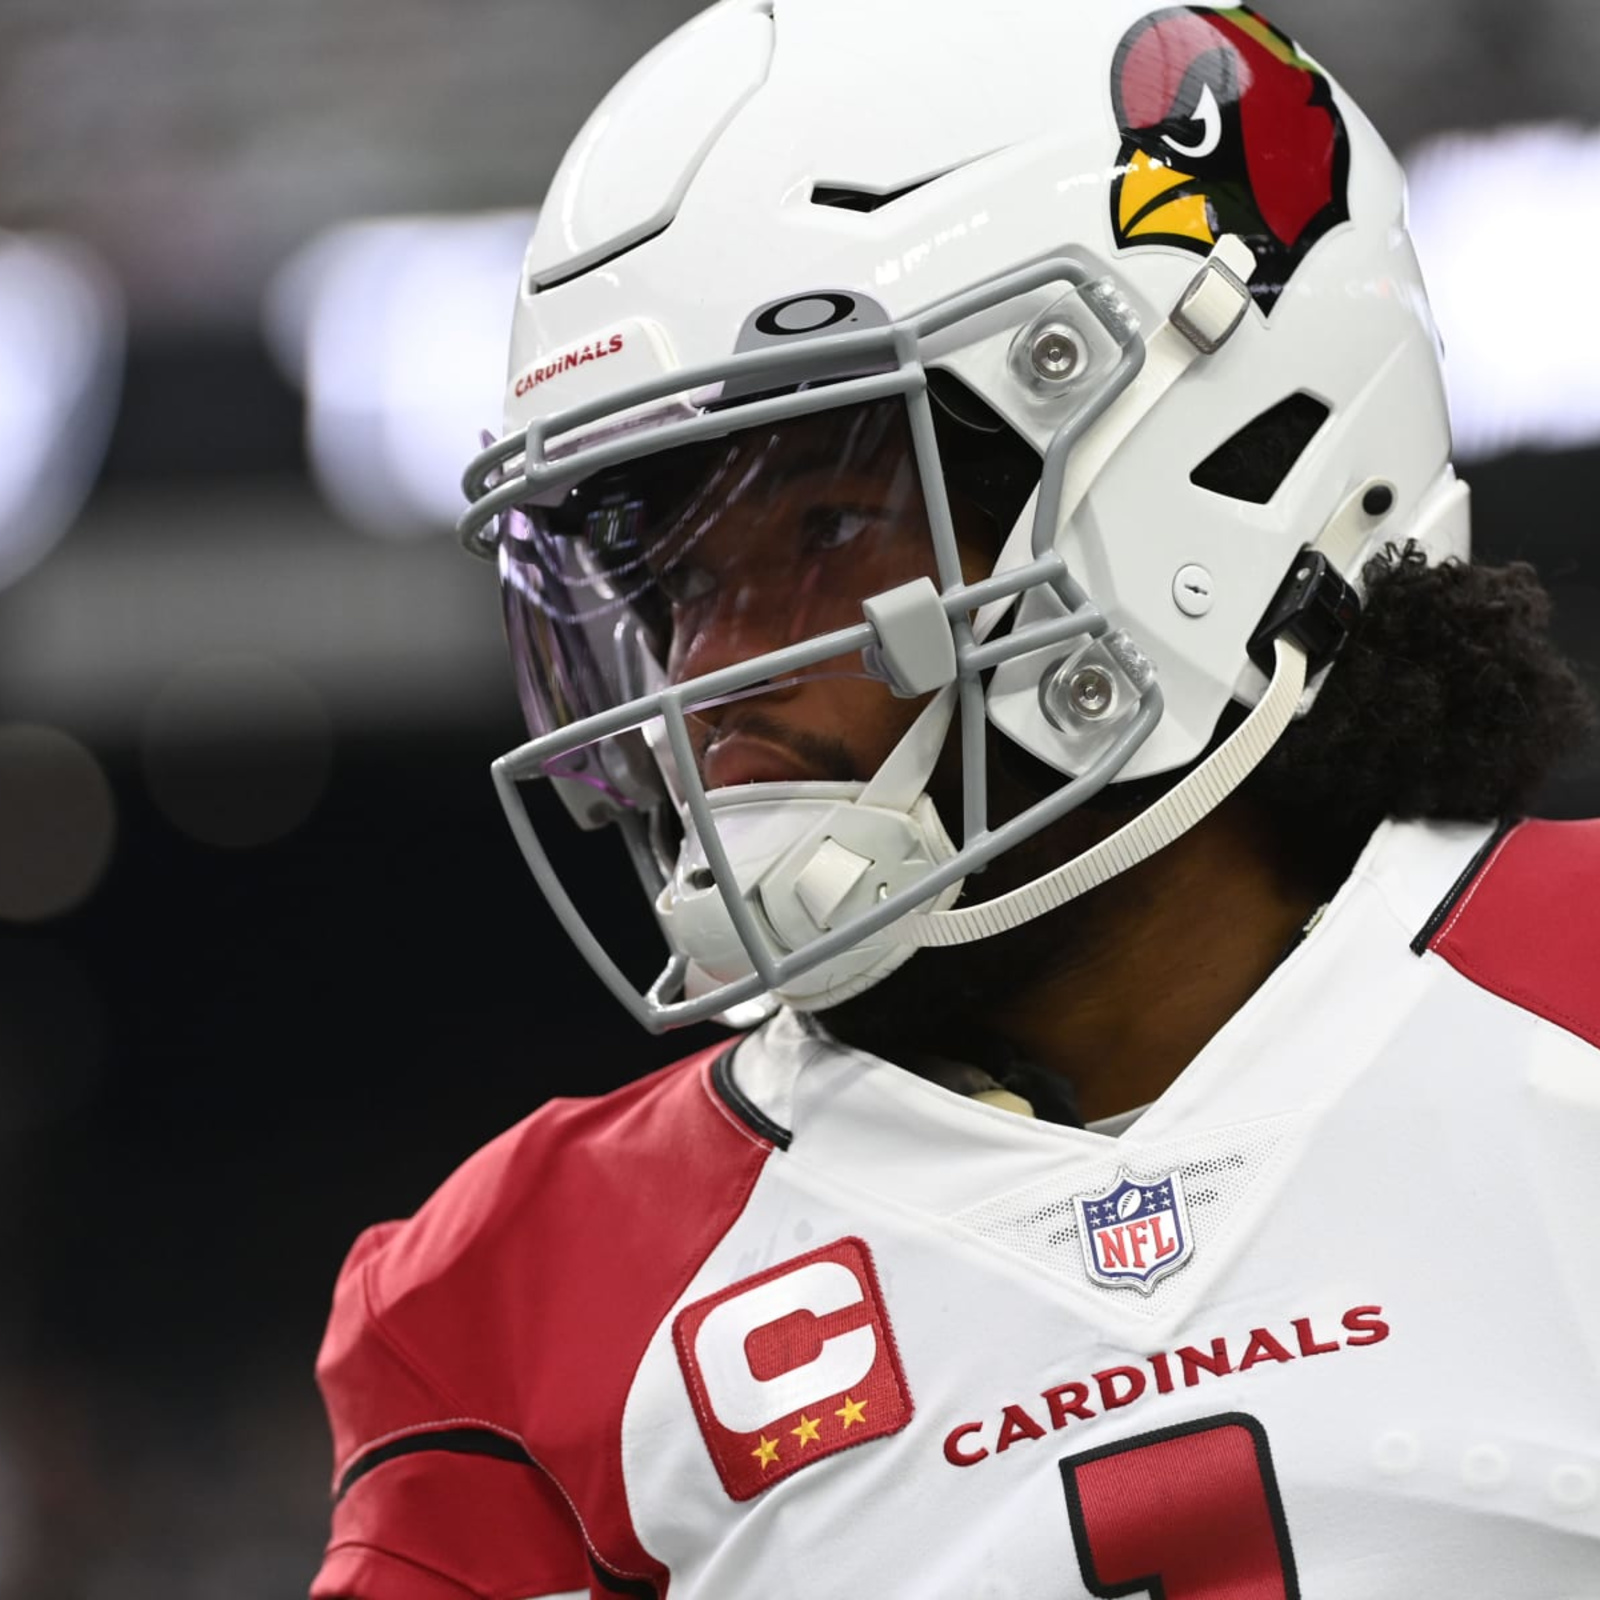 TheCardsWire on X: Have you gotten your Kyler Murray/Cardinals